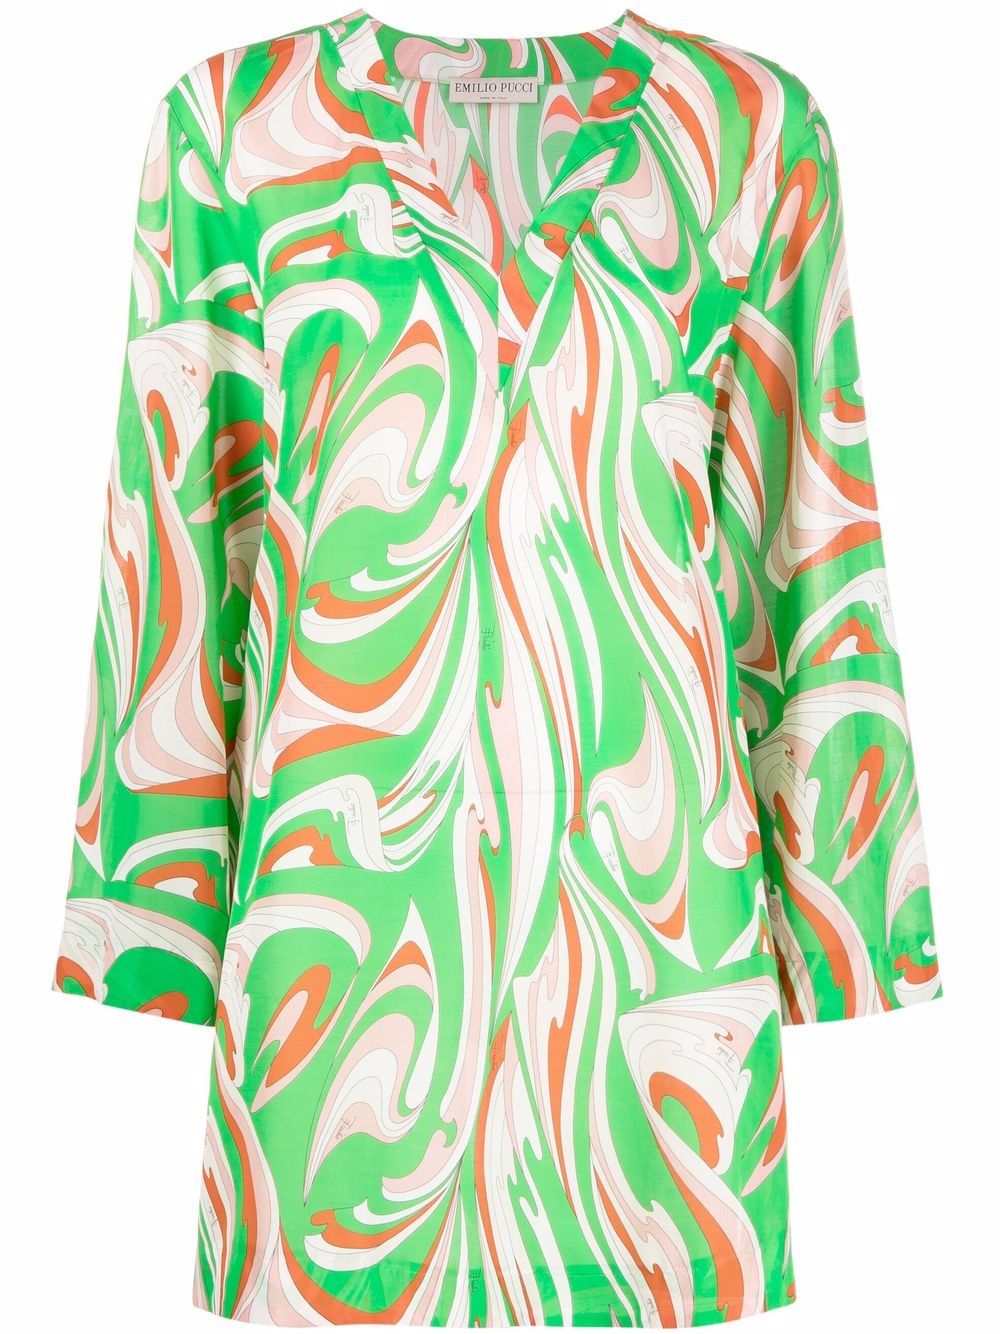 39%OFF！＜Farfetch＞ PUCCI グラフィック リゾートワンピース - グリーン